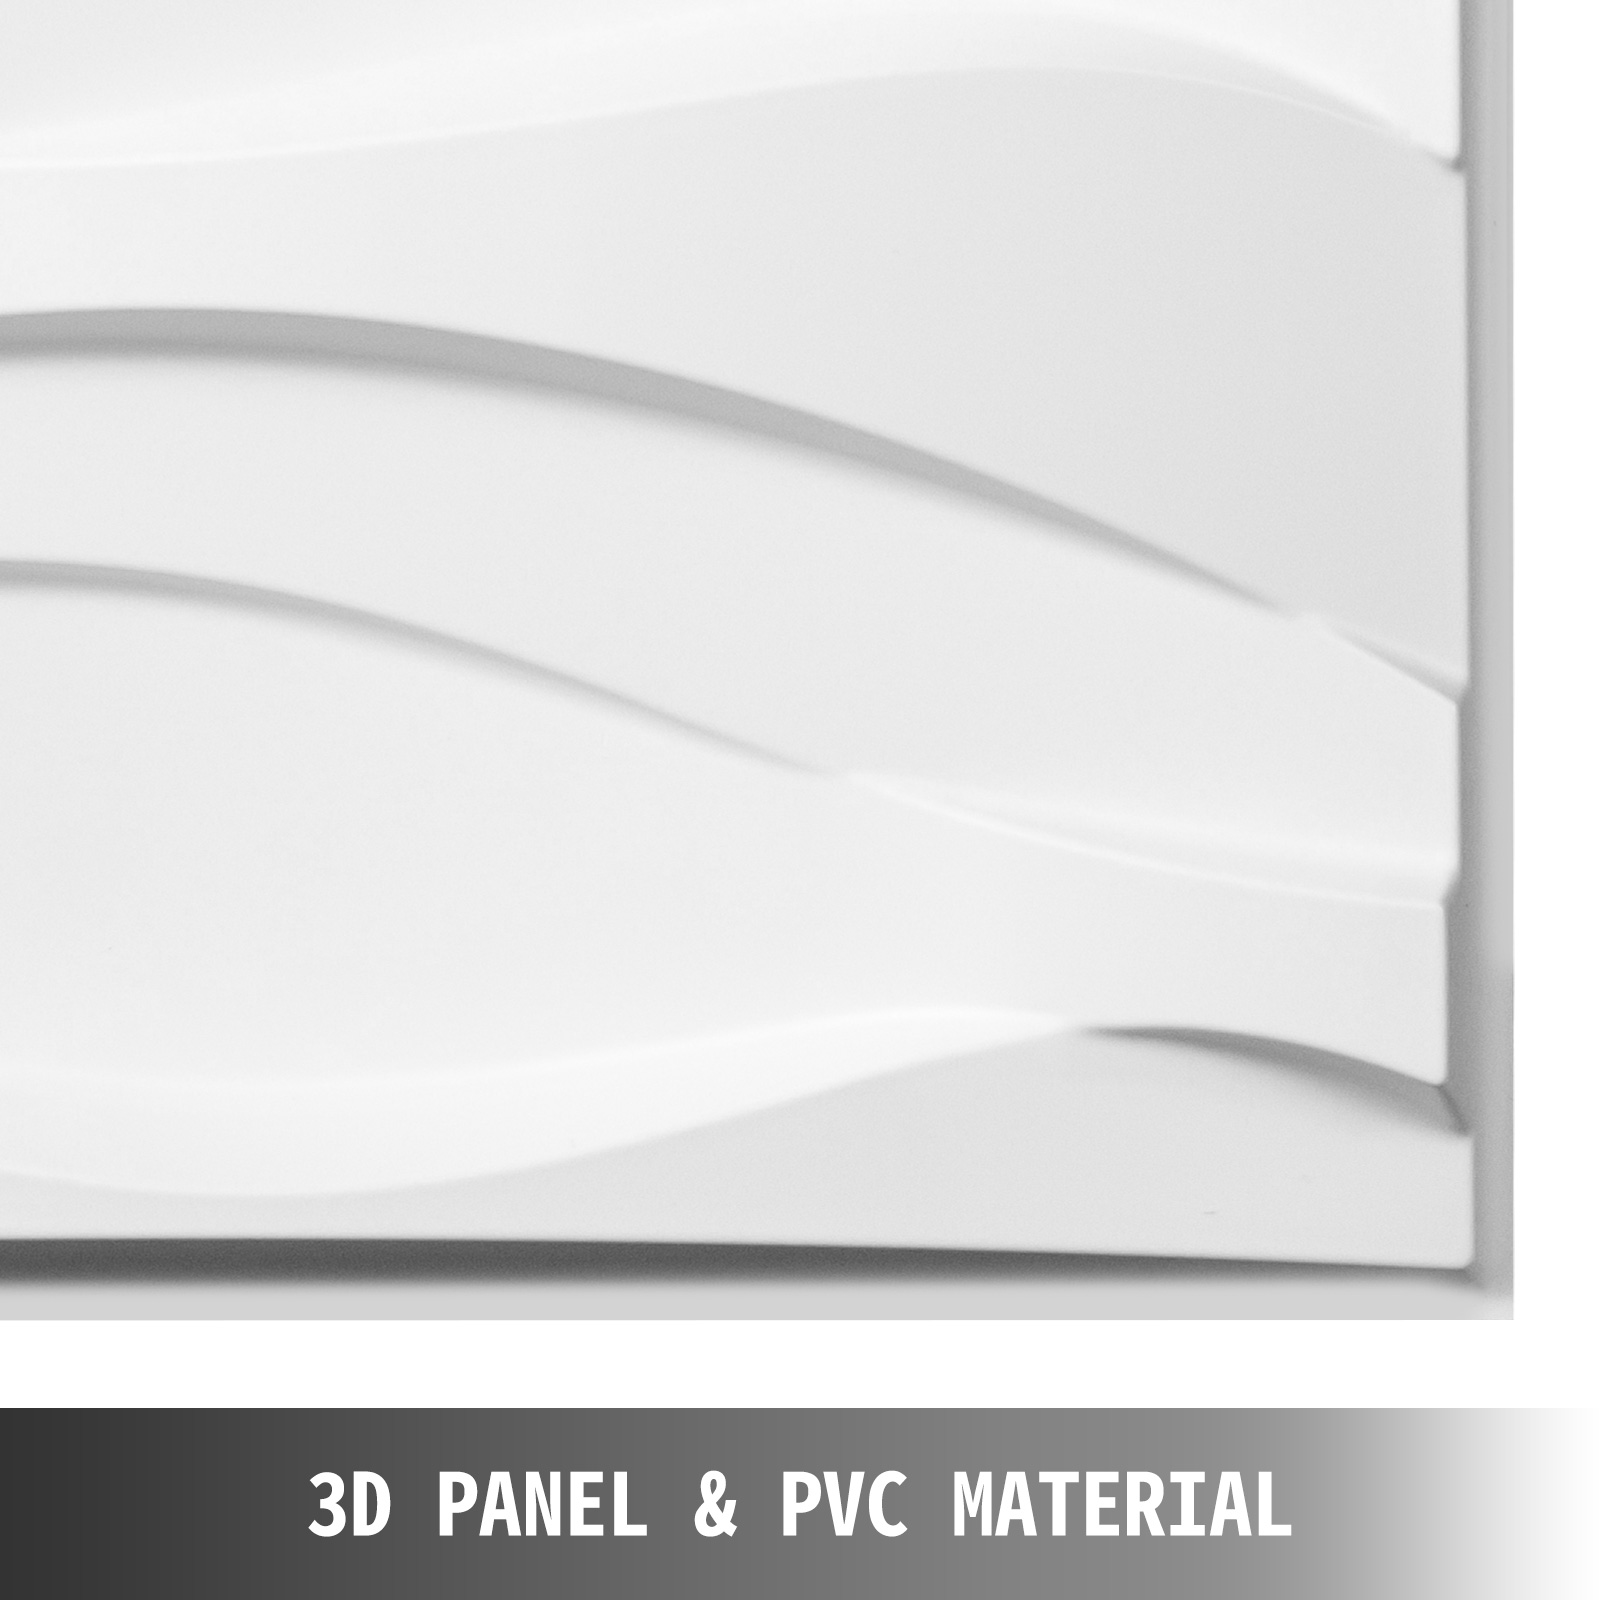 VEVOR 3D Wall Panels 13 Pack Wall Panels PVC Decorative Wall Panels for 32 sqft Area Wall Panels for Interior Wall Decor Big Wave Style 3D Wall Tiles White 3D Wall Art Paintable Modern Wall Panel - image 3 of 9